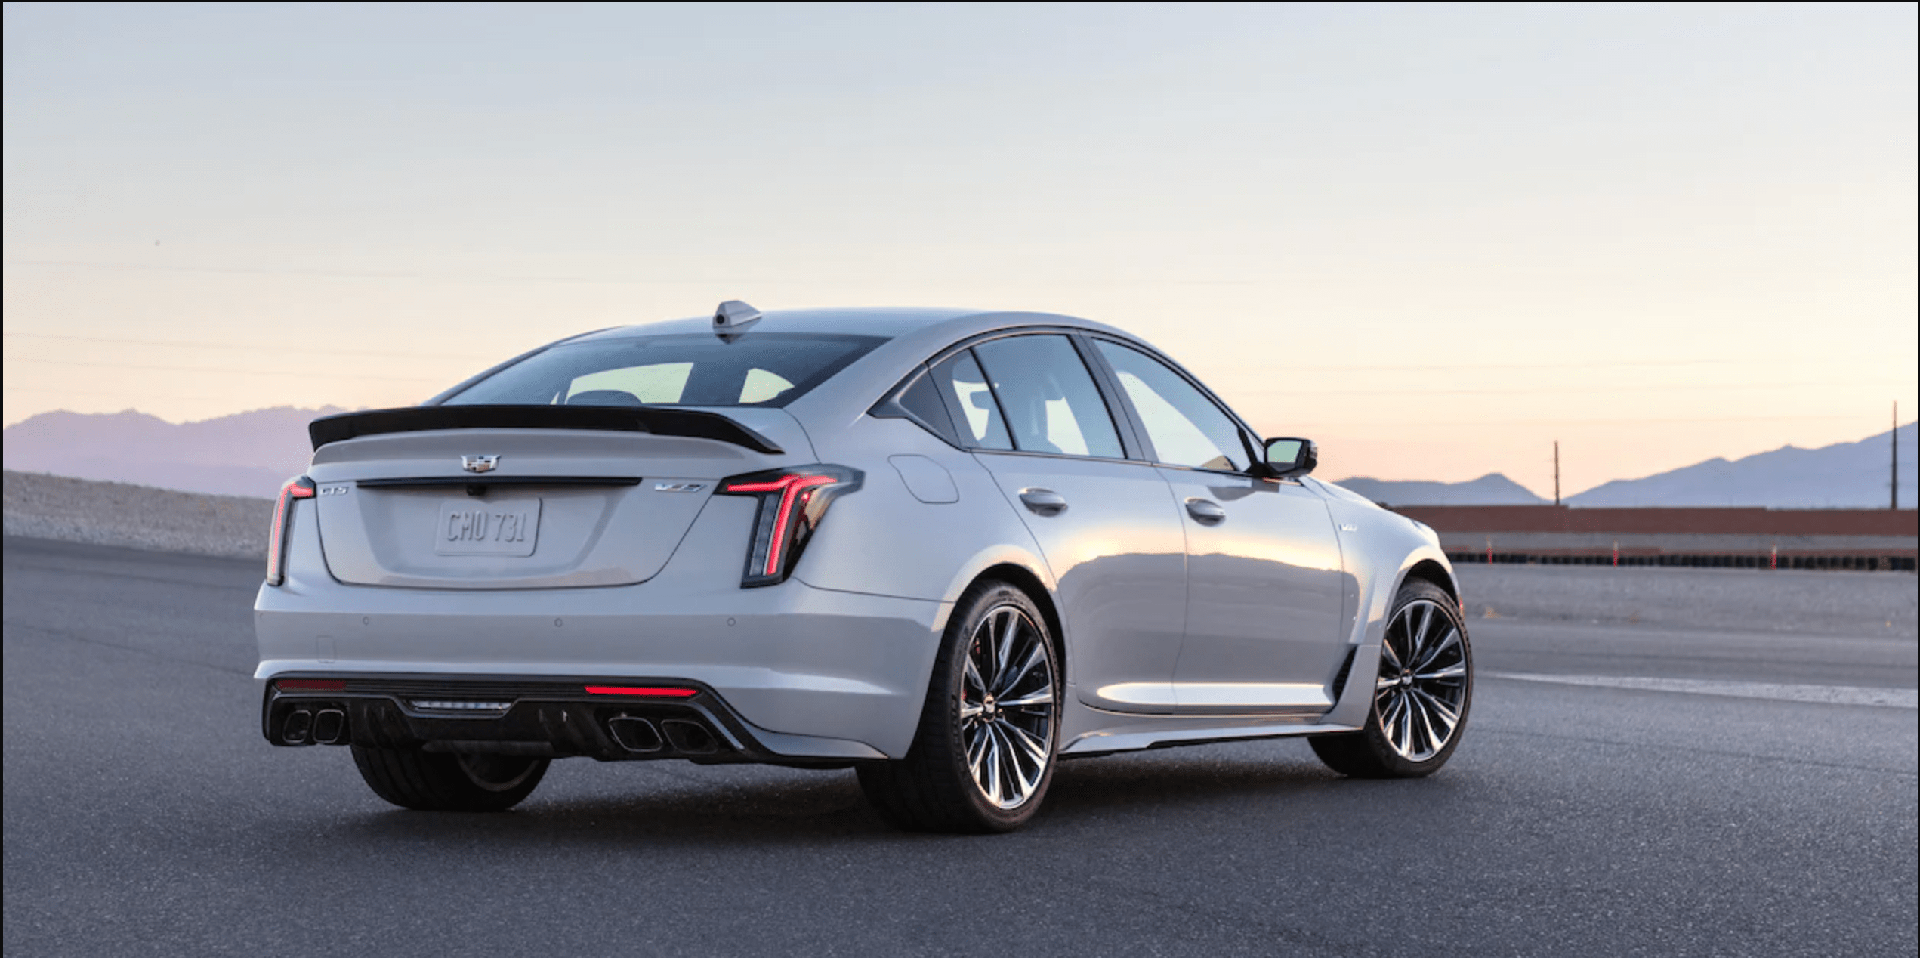 2022 Cadillac CT5-V Blackwing for Sale | Five Star Cadillac